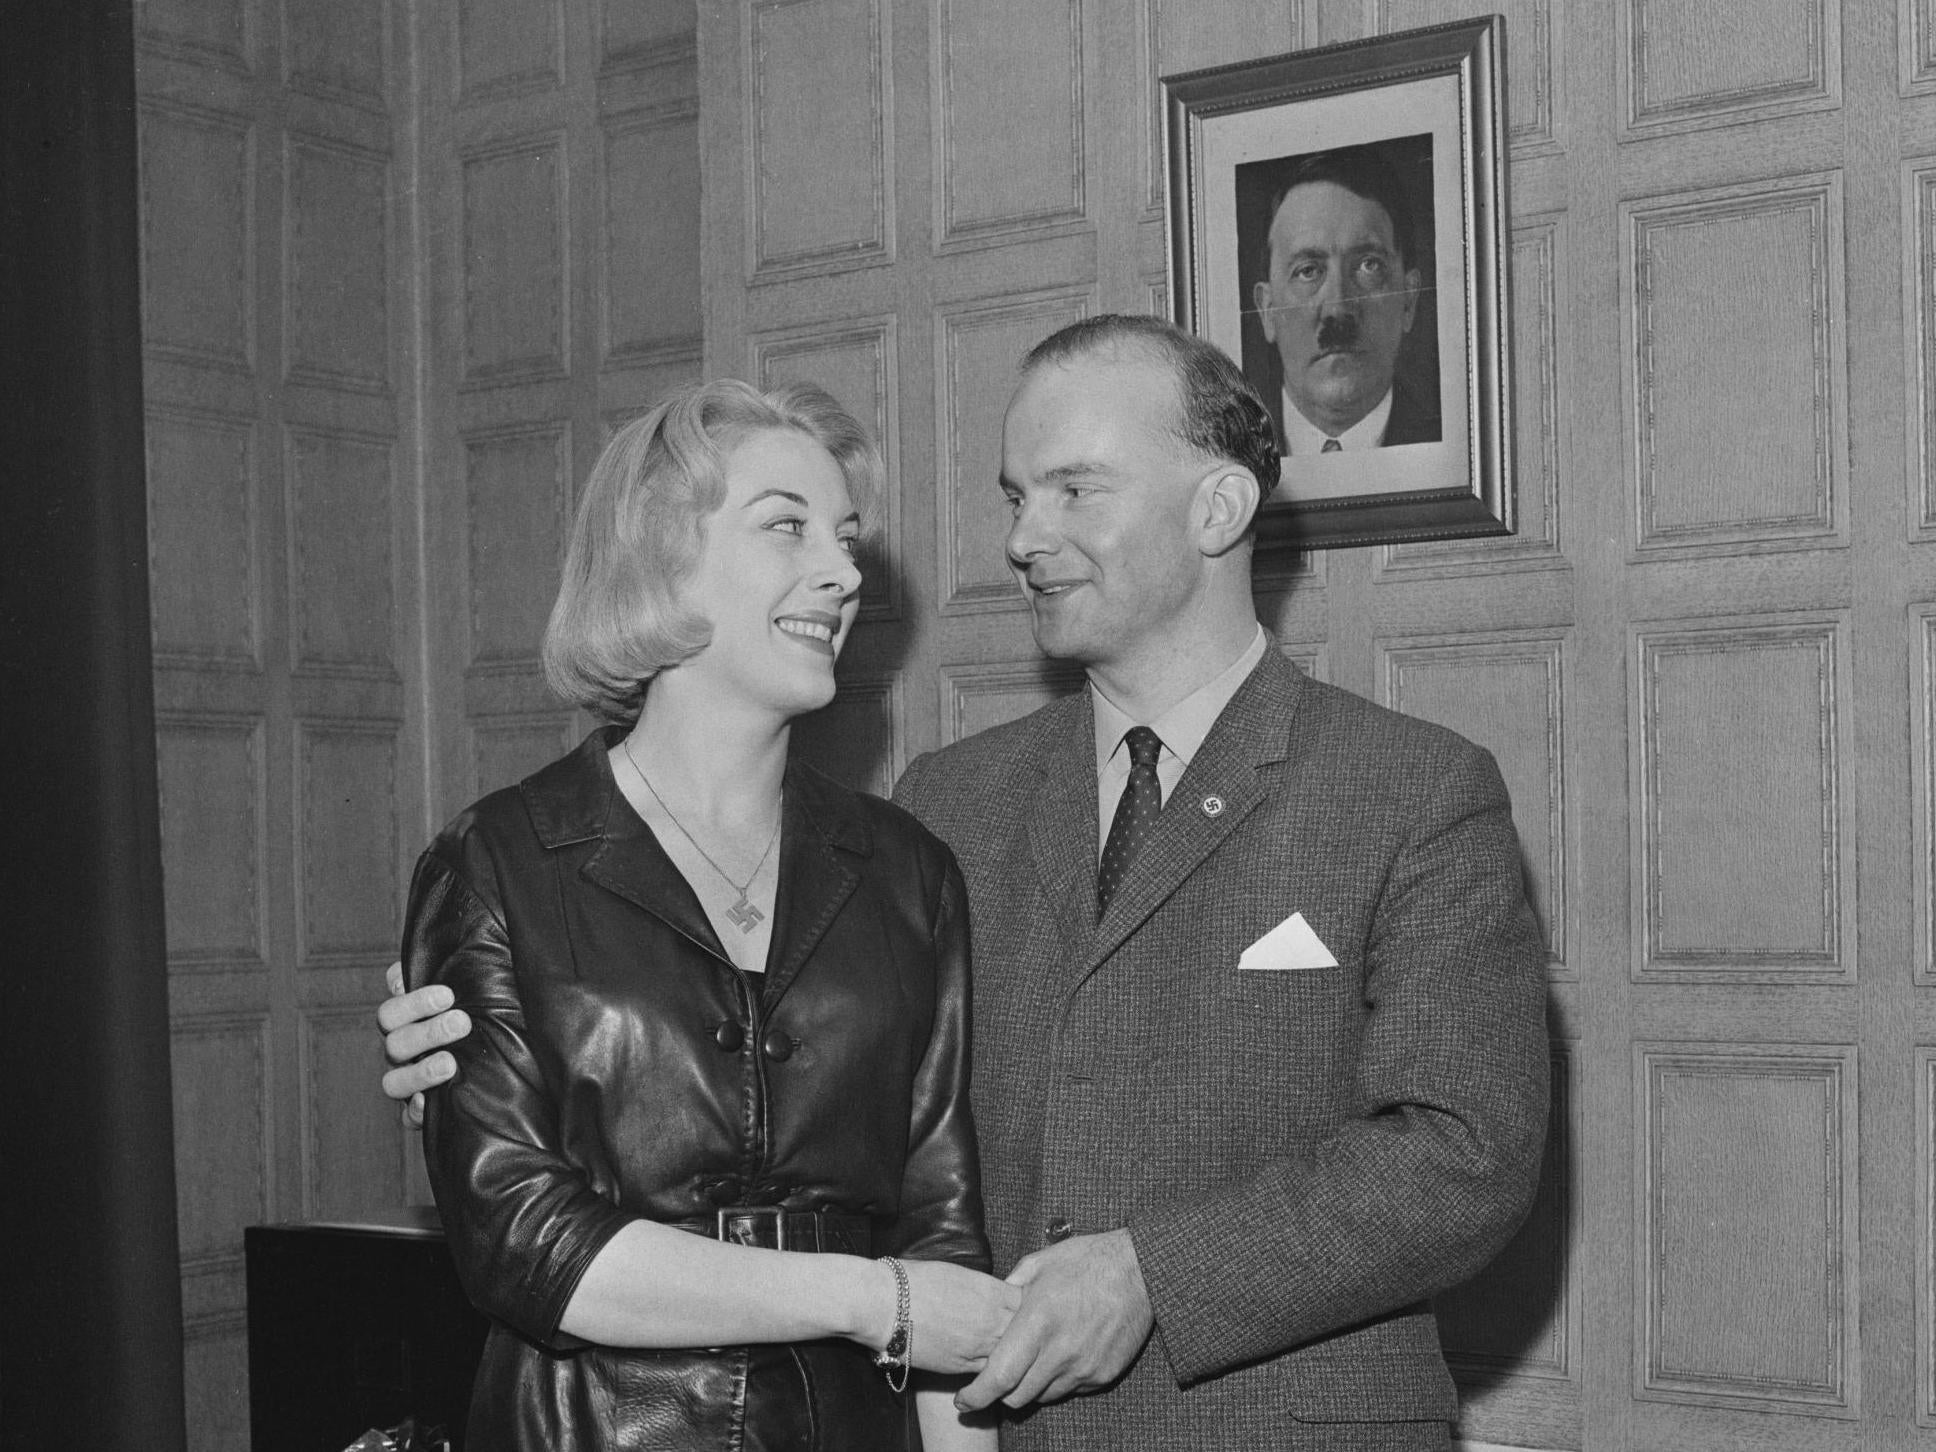 Partners in hate: Colin Jordan and Françoise Dior in 1963, the year of their marriage